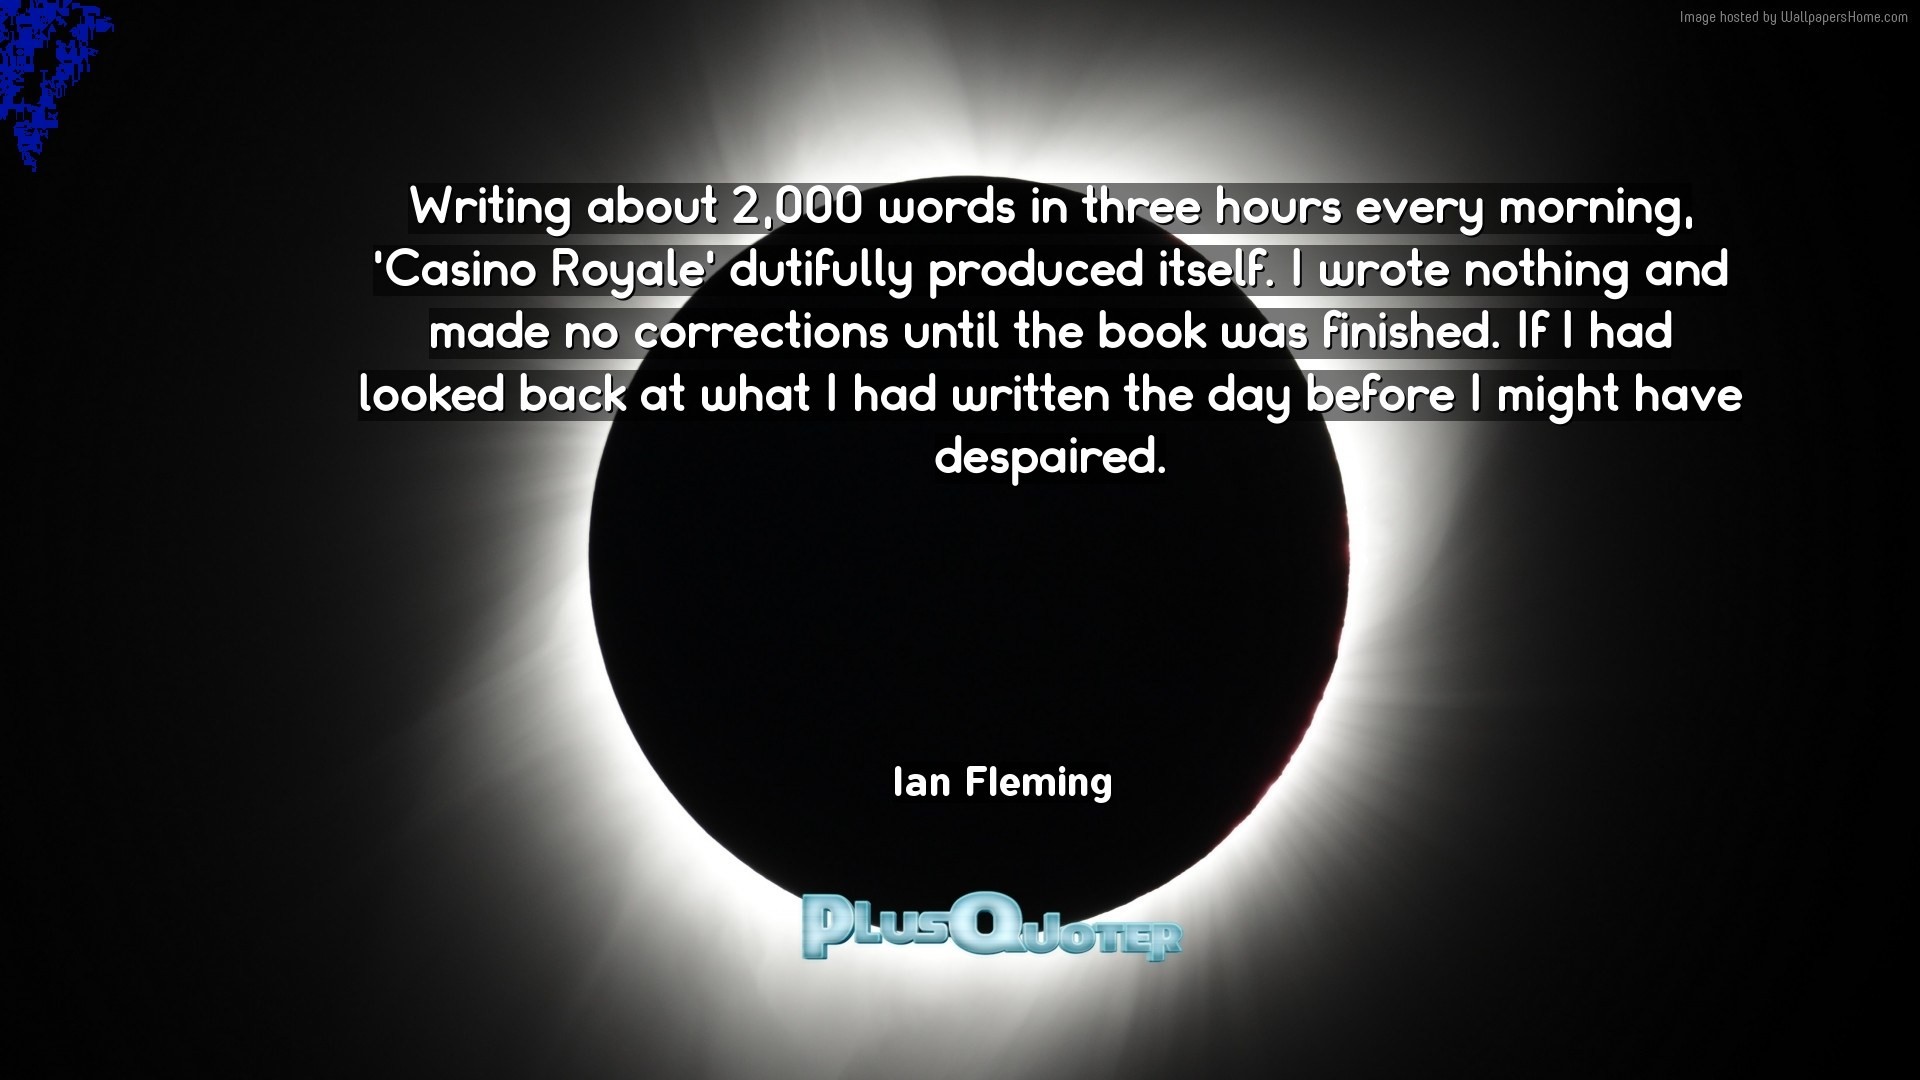 1920x1080 Download Wallpaper with inspirational Quotes- "Writing about 2,000 words in  three hours every morning